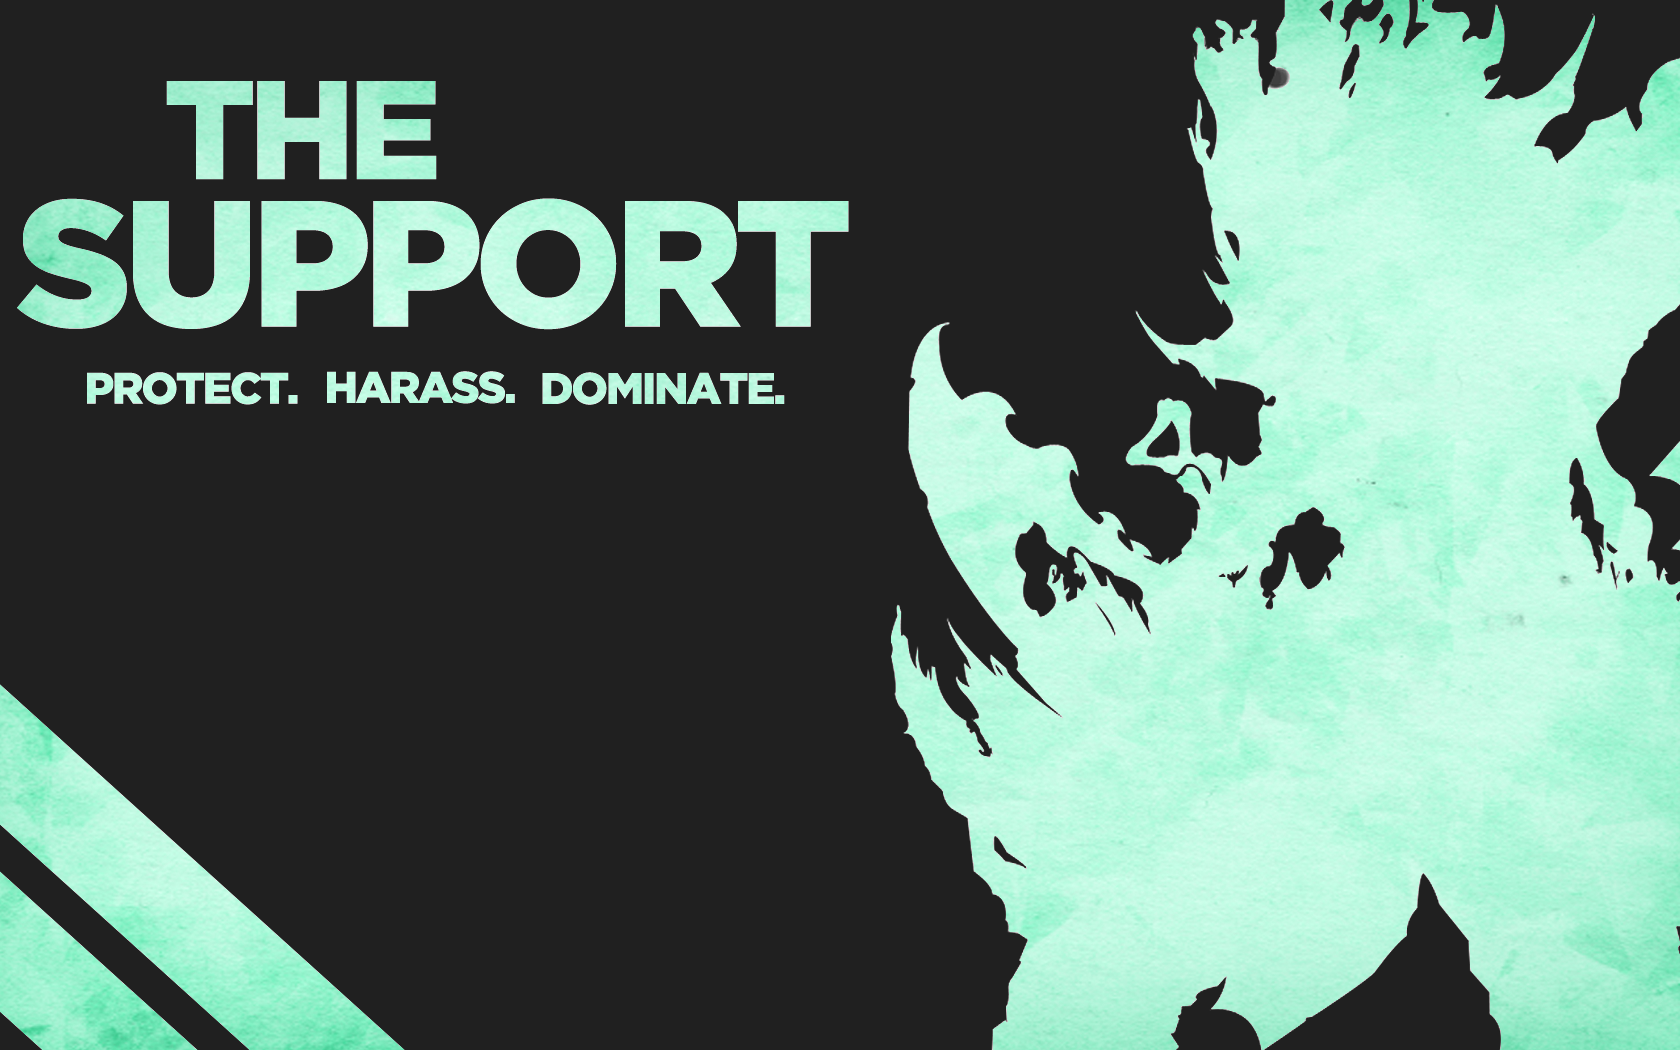 League Of Legends Thresh Supporters 1680x1050